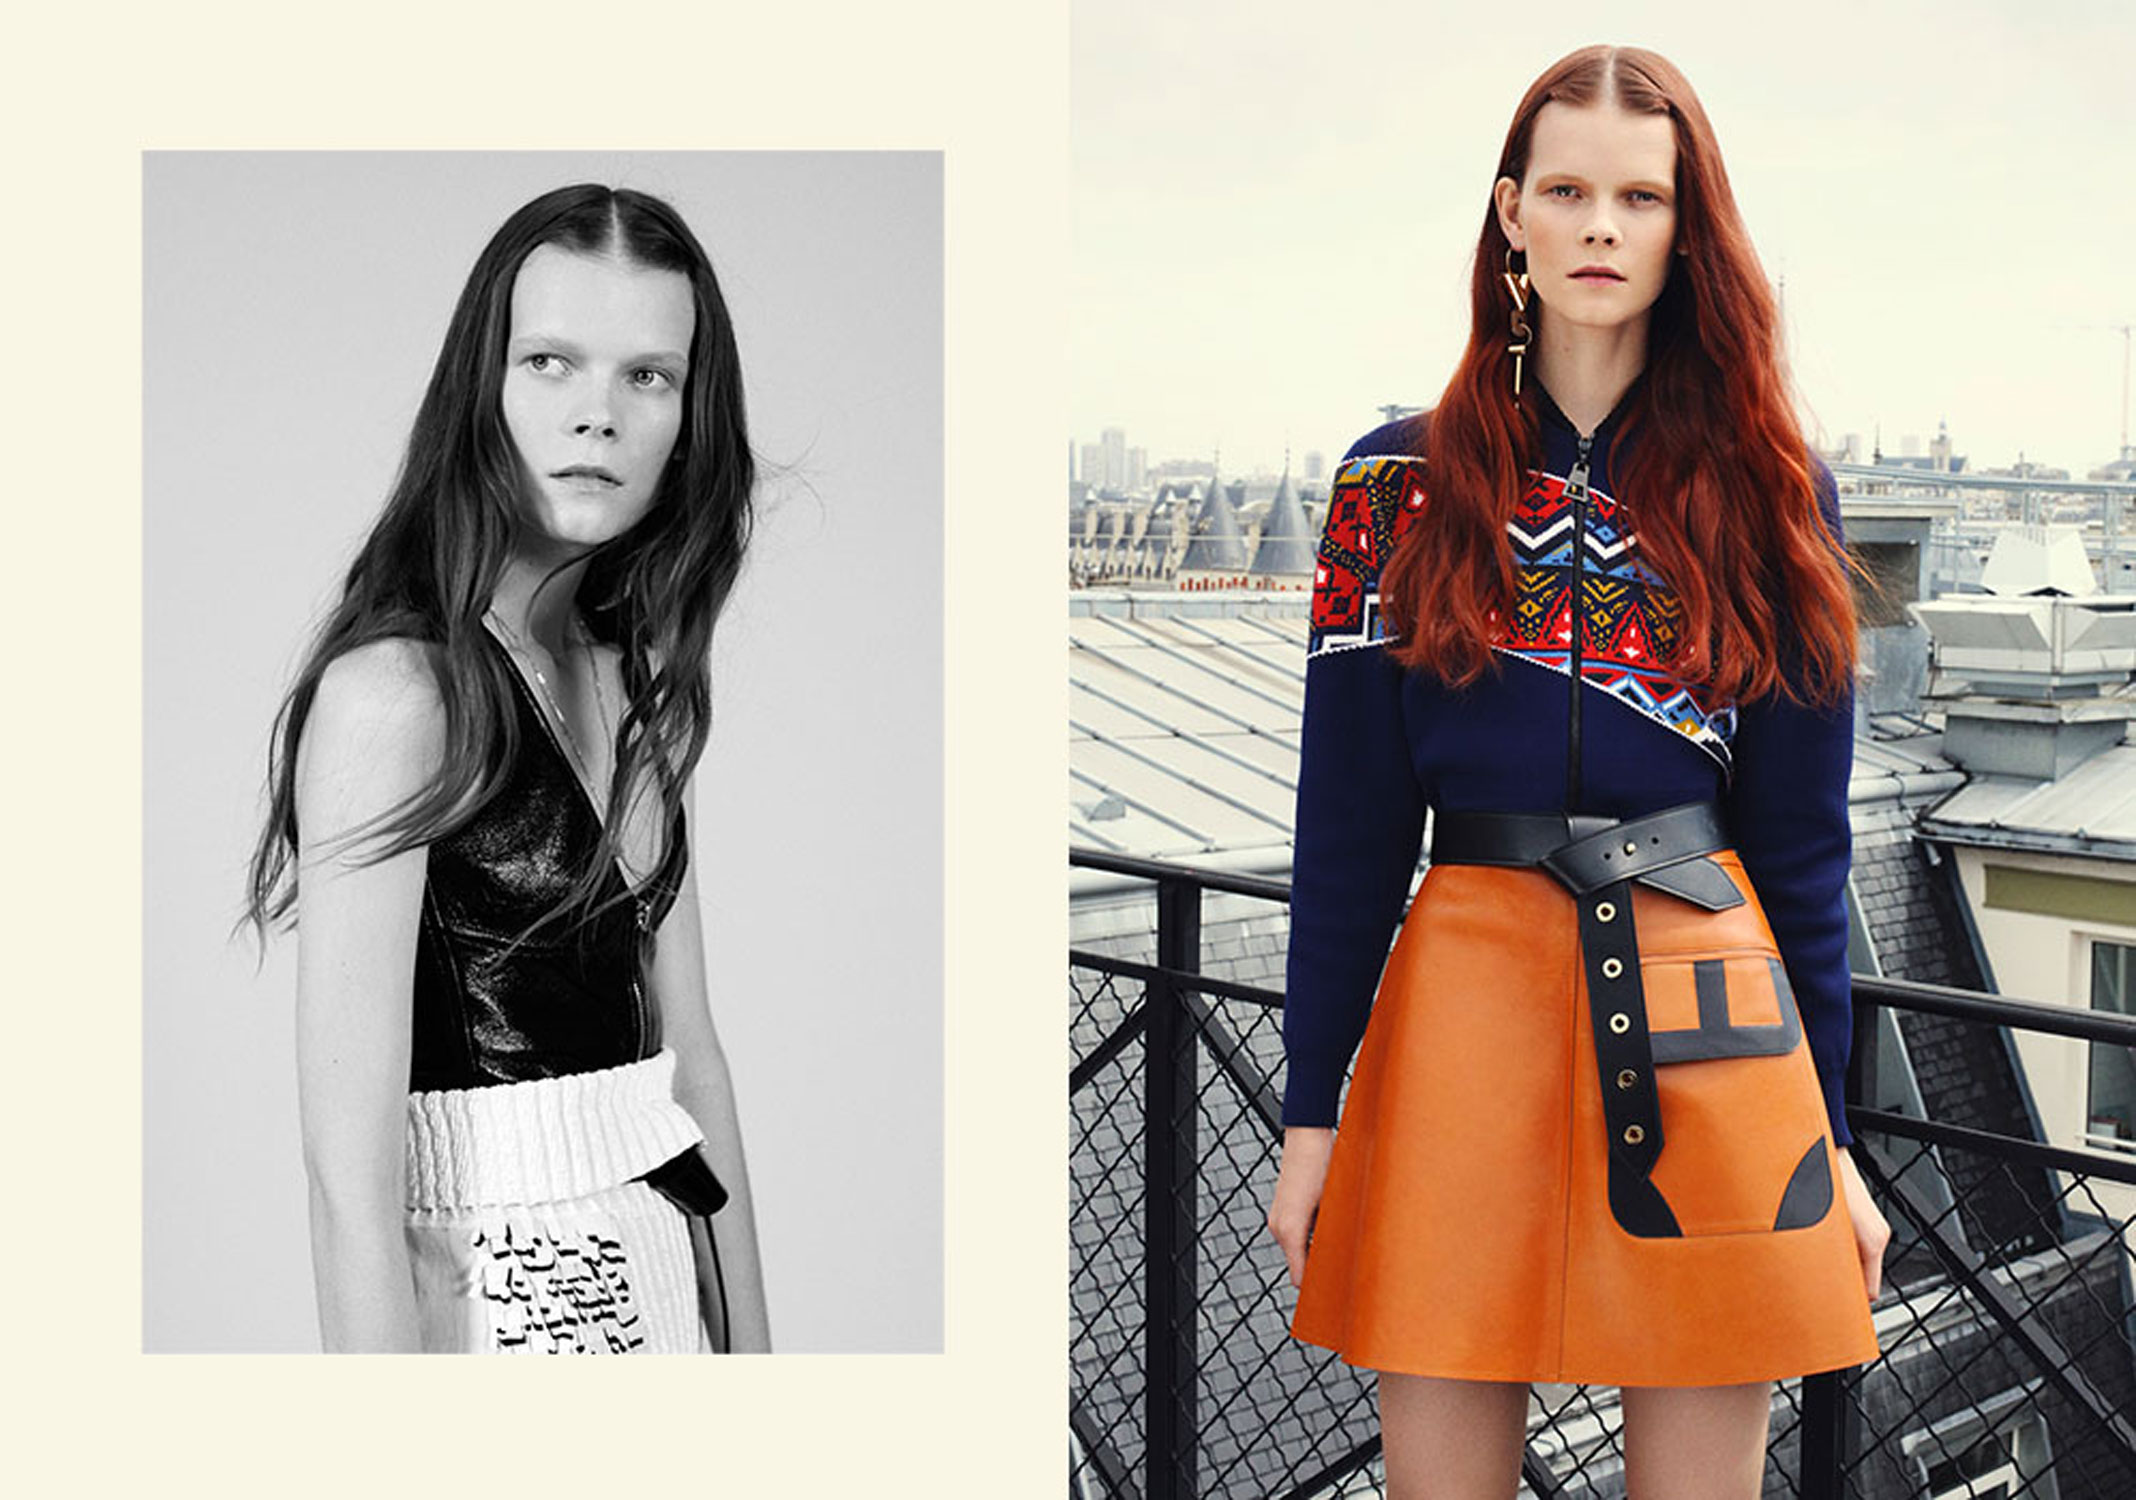 Telegraph Fashion Story in Stella styled by Charlie Harrington. Spread 1.